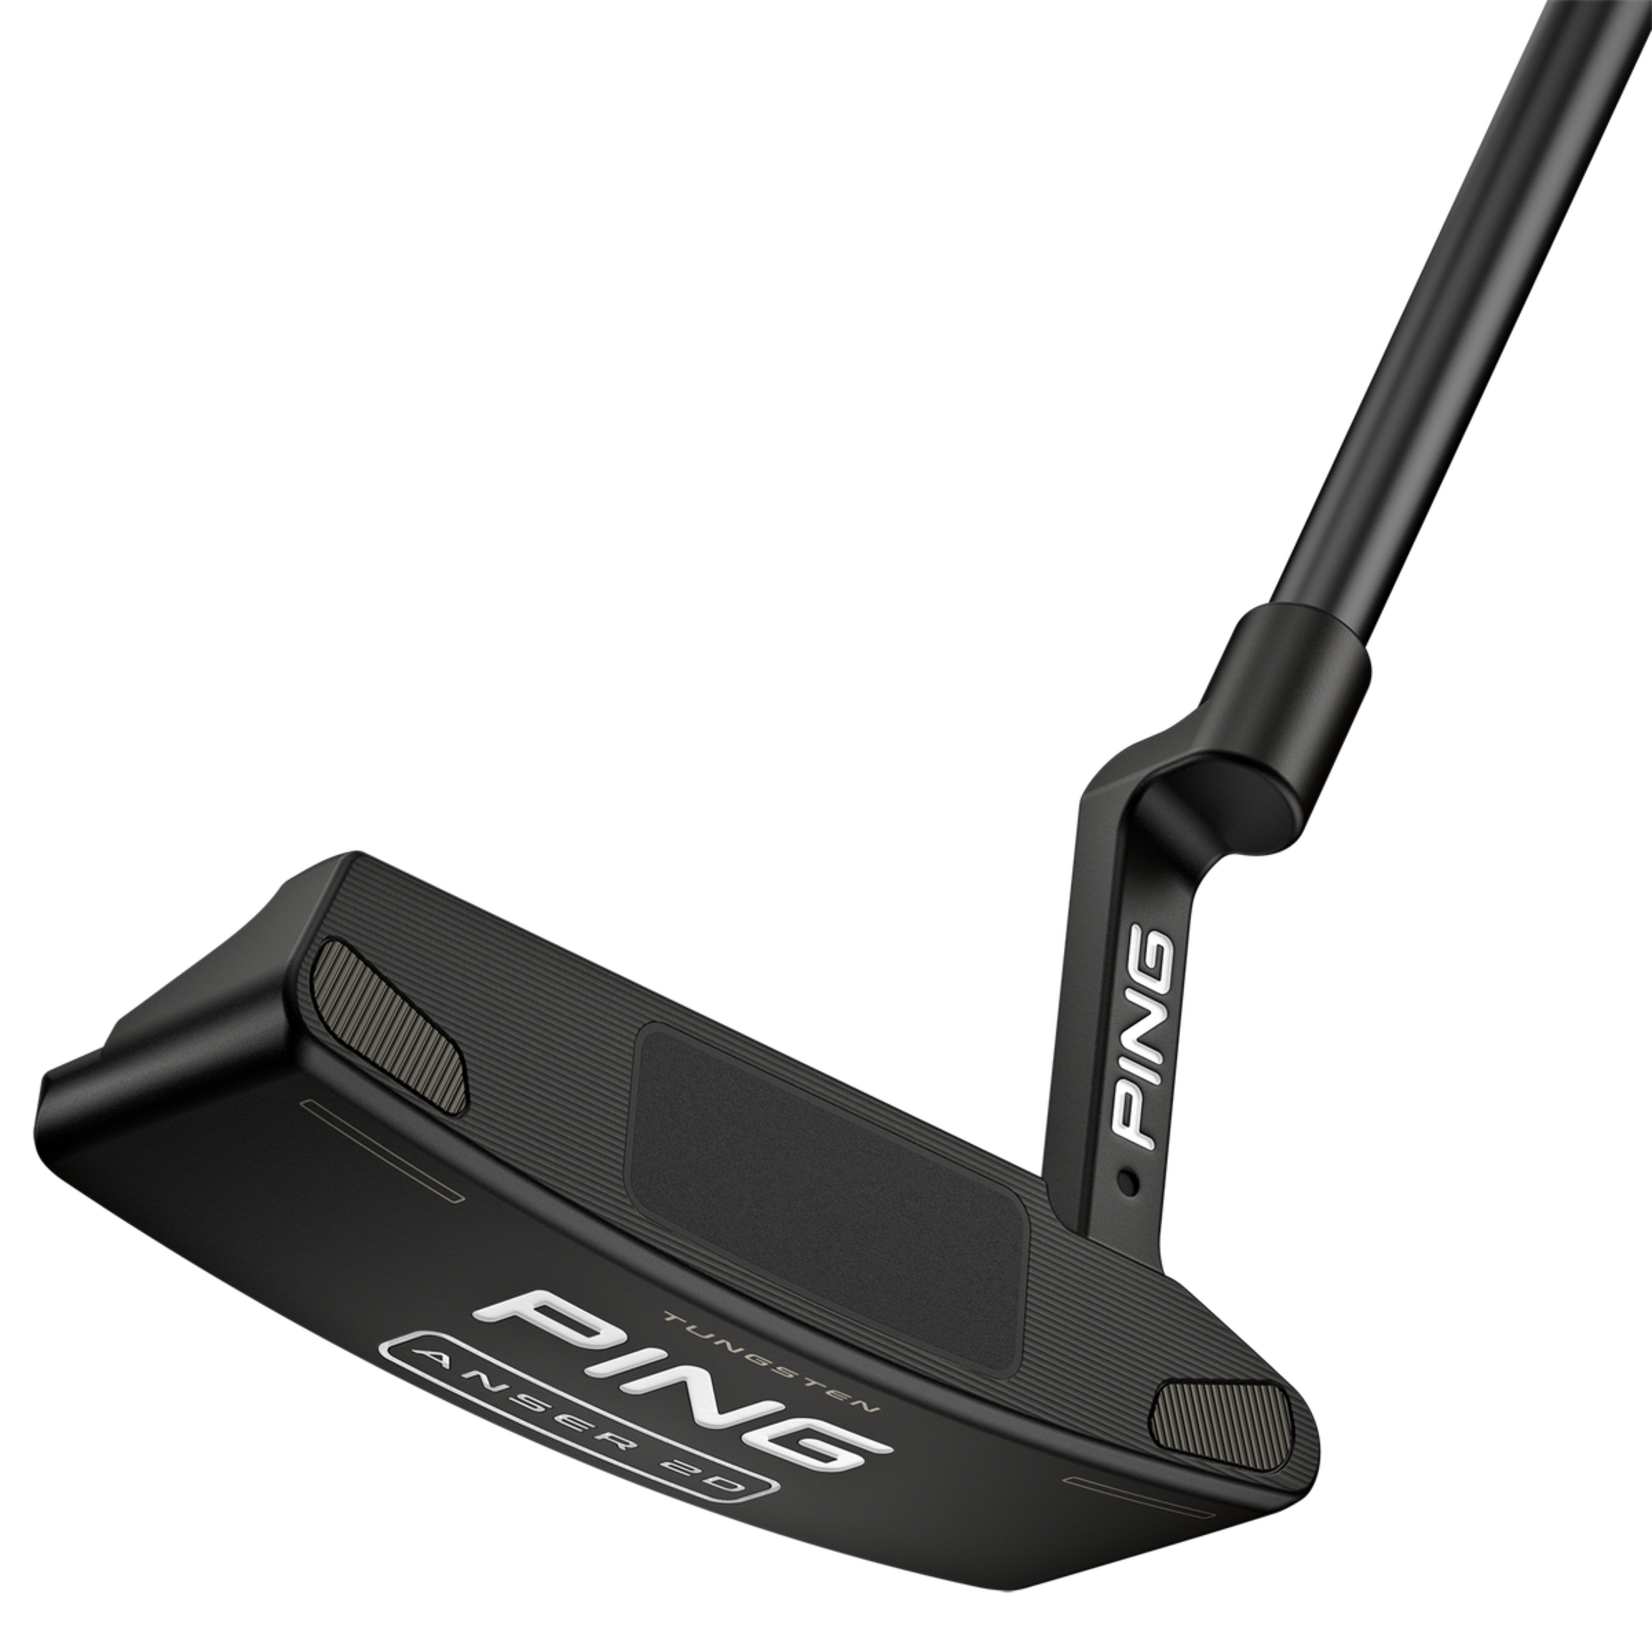 PING PING 2023 ANSER 2D 35" - RIGHT HAND